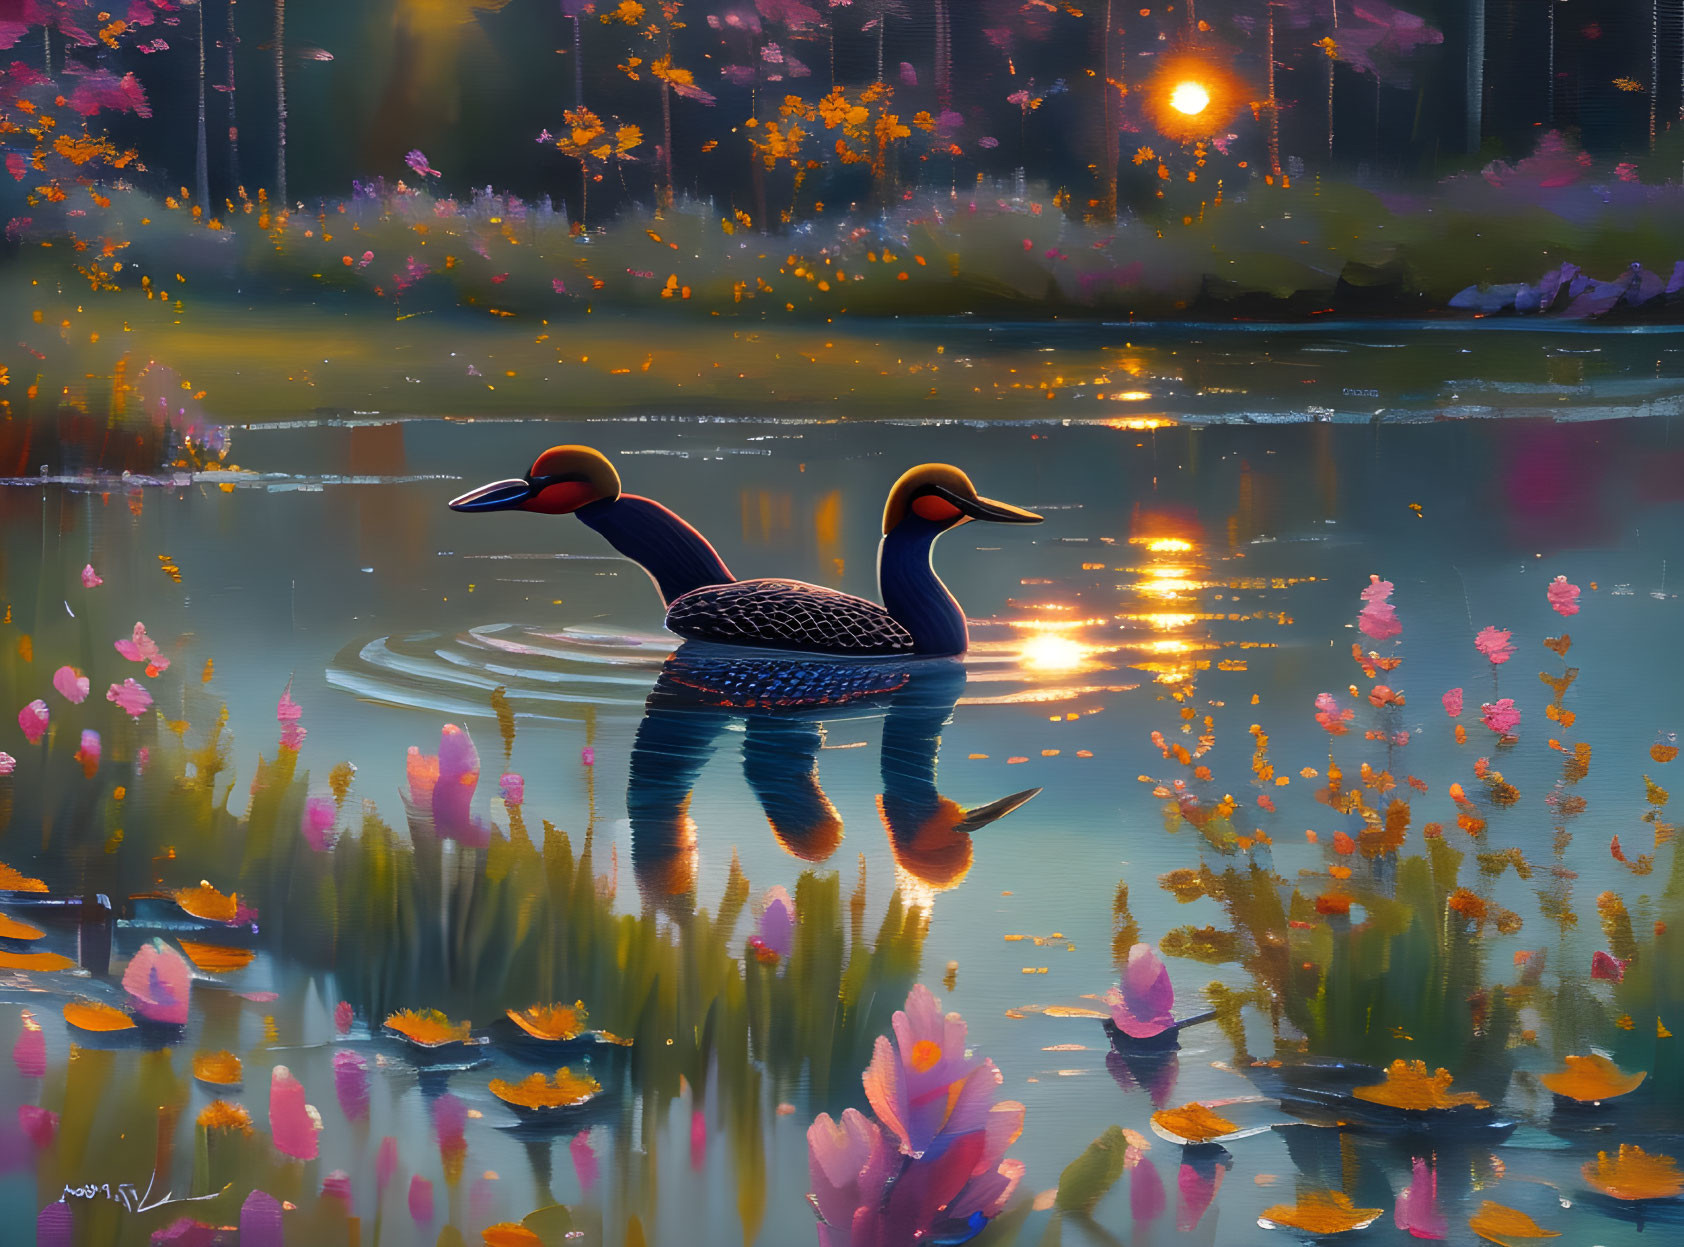 Tranquil lake sunset scene with ducks, flowers, and forest.